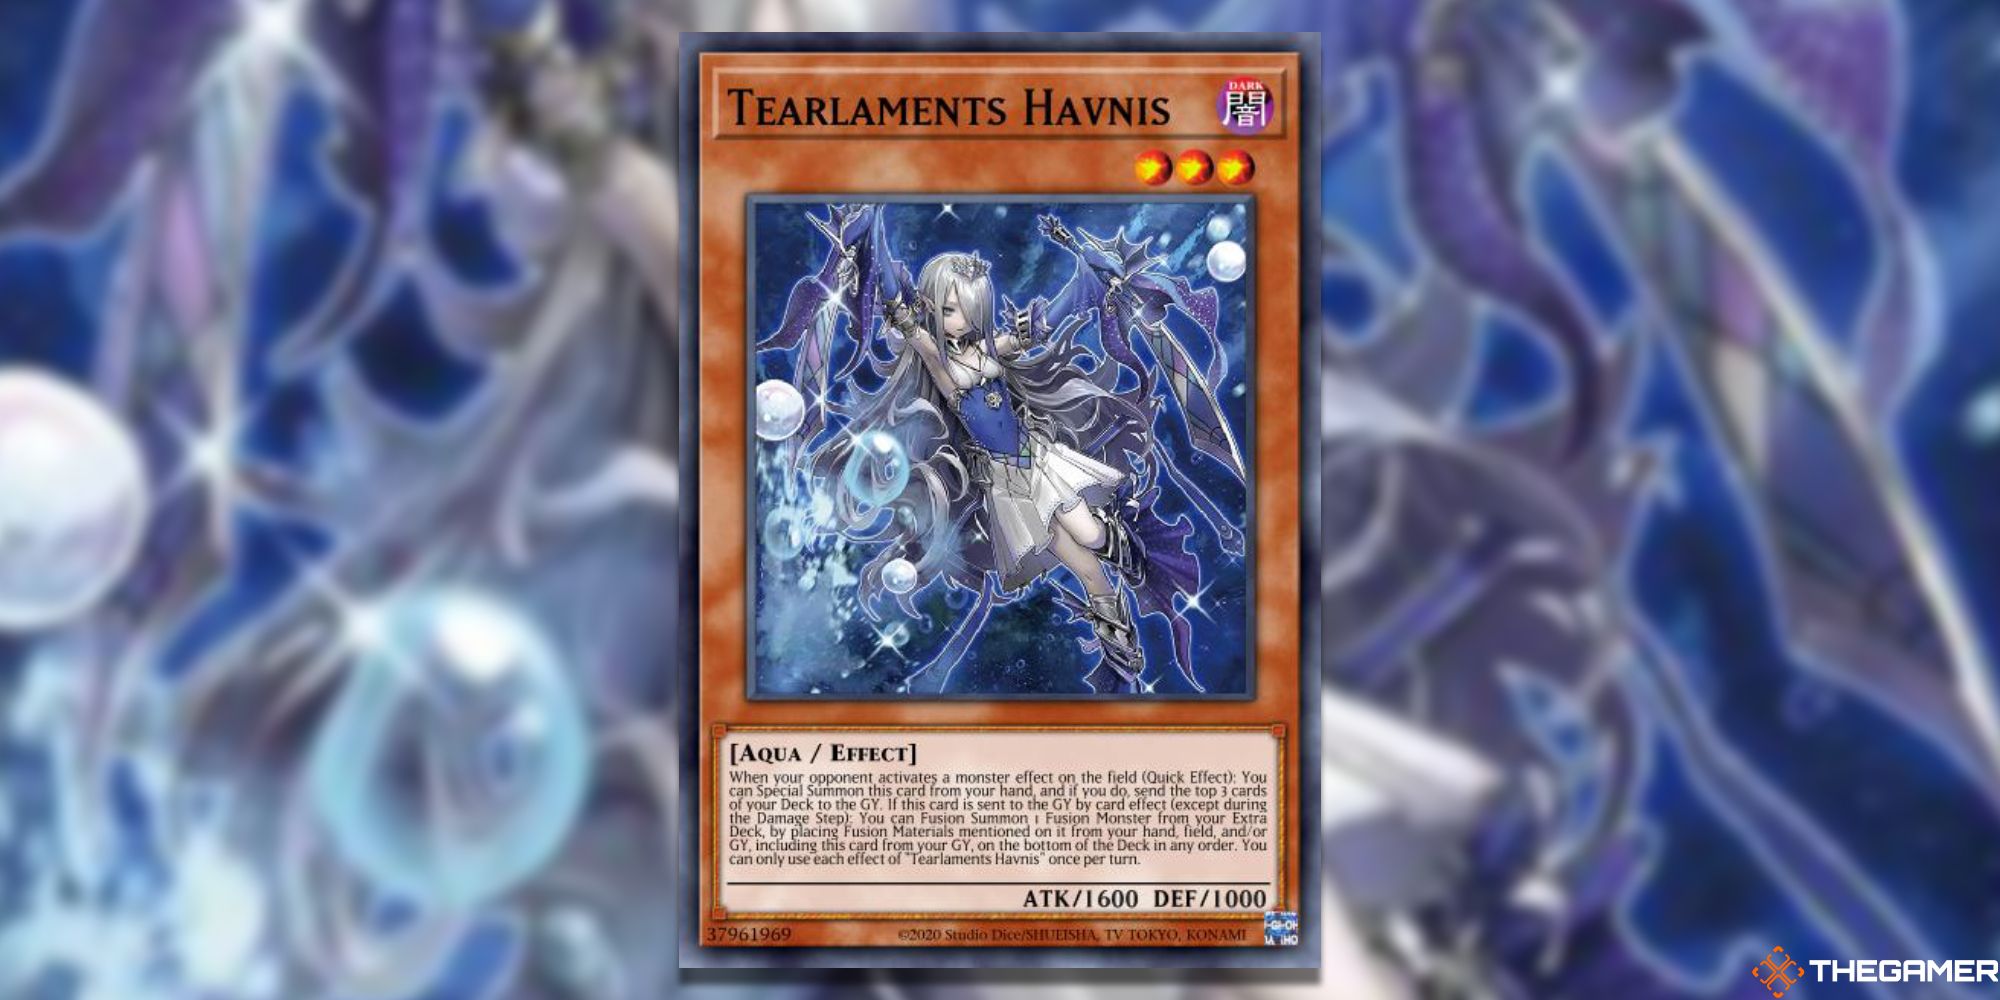 Tiaraments Havnis Full Card with Gauss Blur from Yu-Gi-Oh!master duel